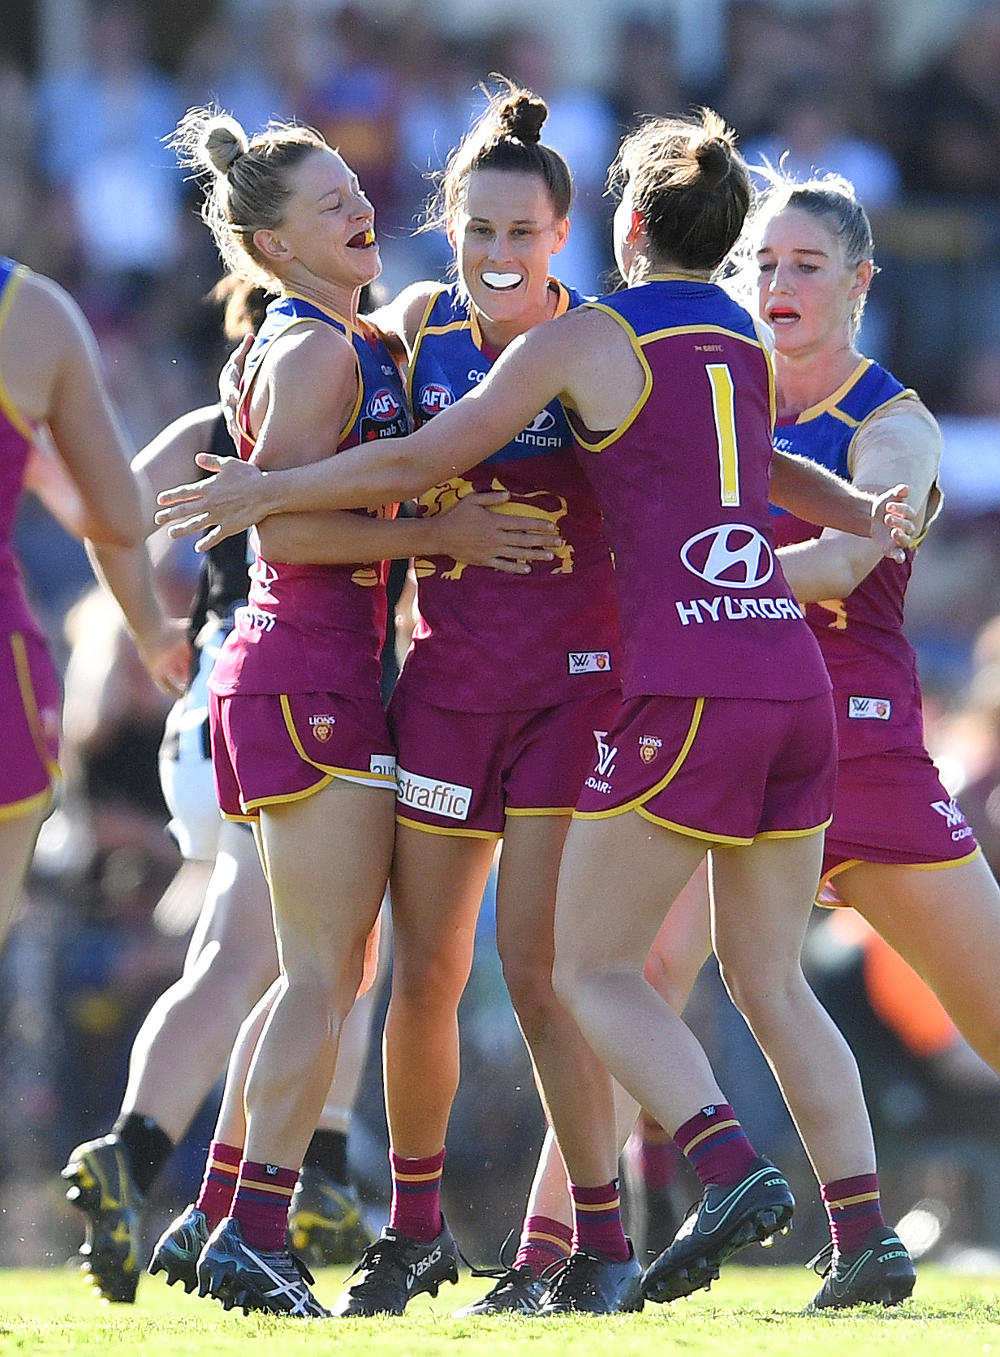 Emma Zeilke of the Brisbane Lions (centre) celebrates scoring a goal during their Round 3 AFLW game against Collingwod at the Southpine Sports Complex in Brisbane, Saturday, Feb. 18, 2017. (AAP Image/Dan Peled)